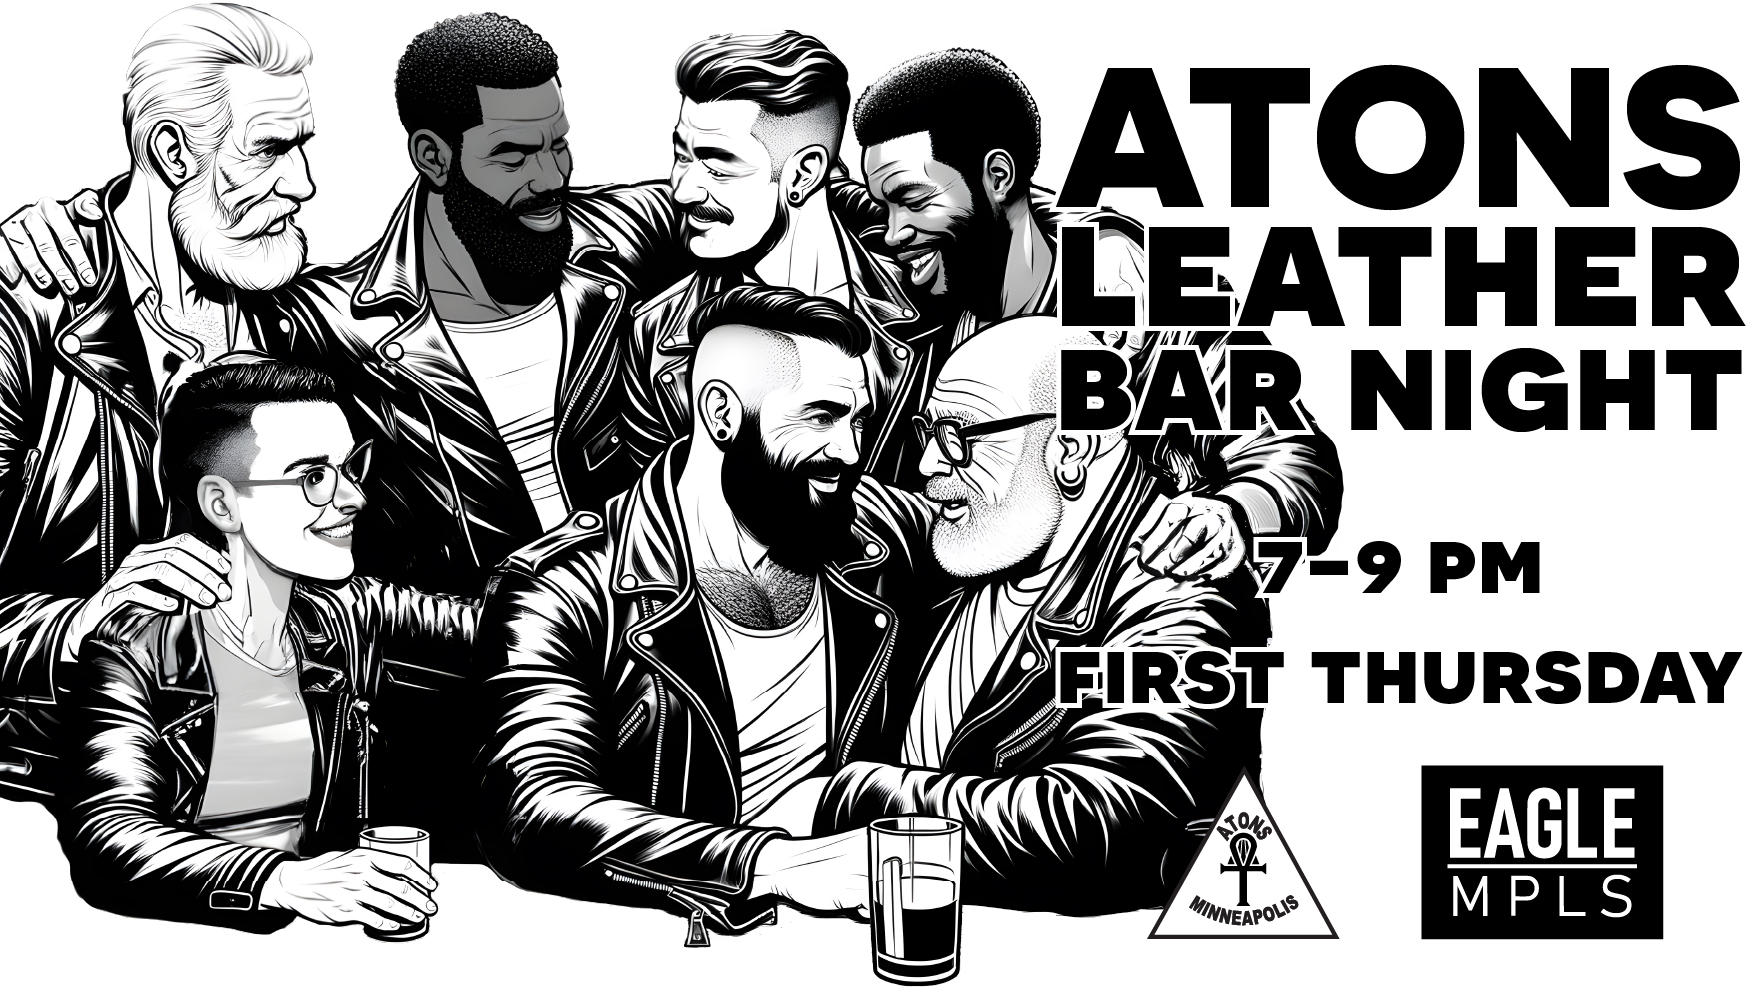 Group of people in leather jackets socializing; ATONS Leather Bar Night event, 7-9 PM, First Thursday."